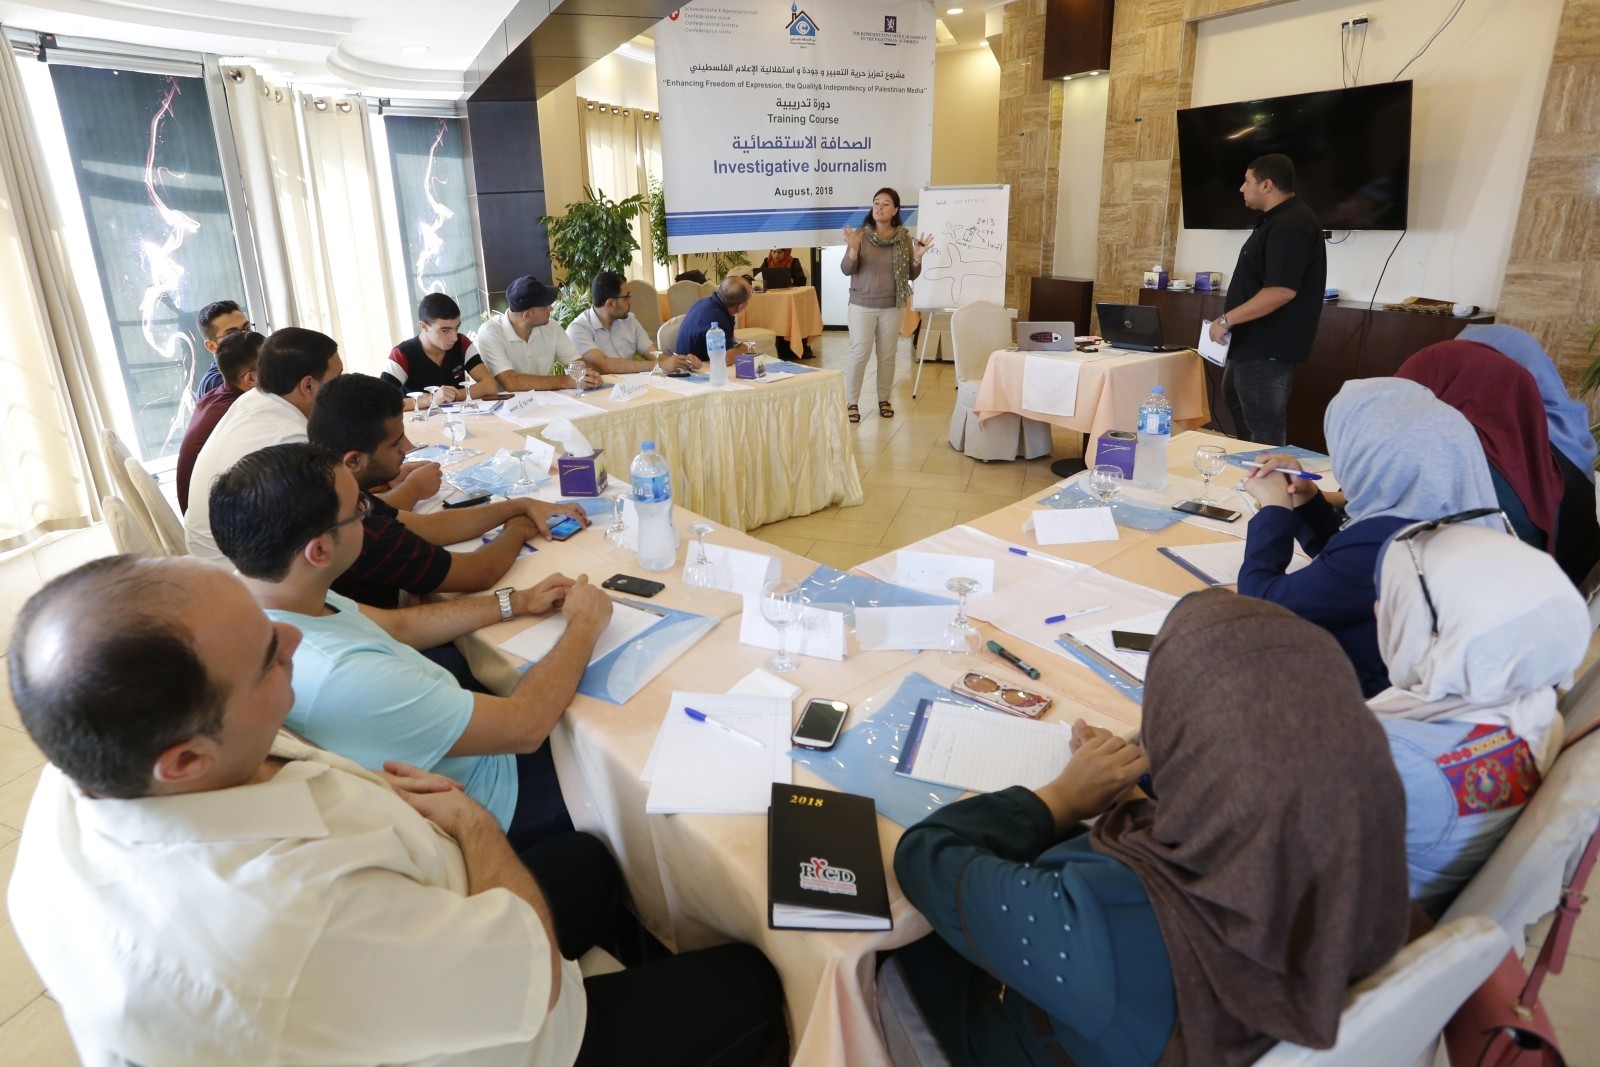 Press House holds a training course in investigative journalism